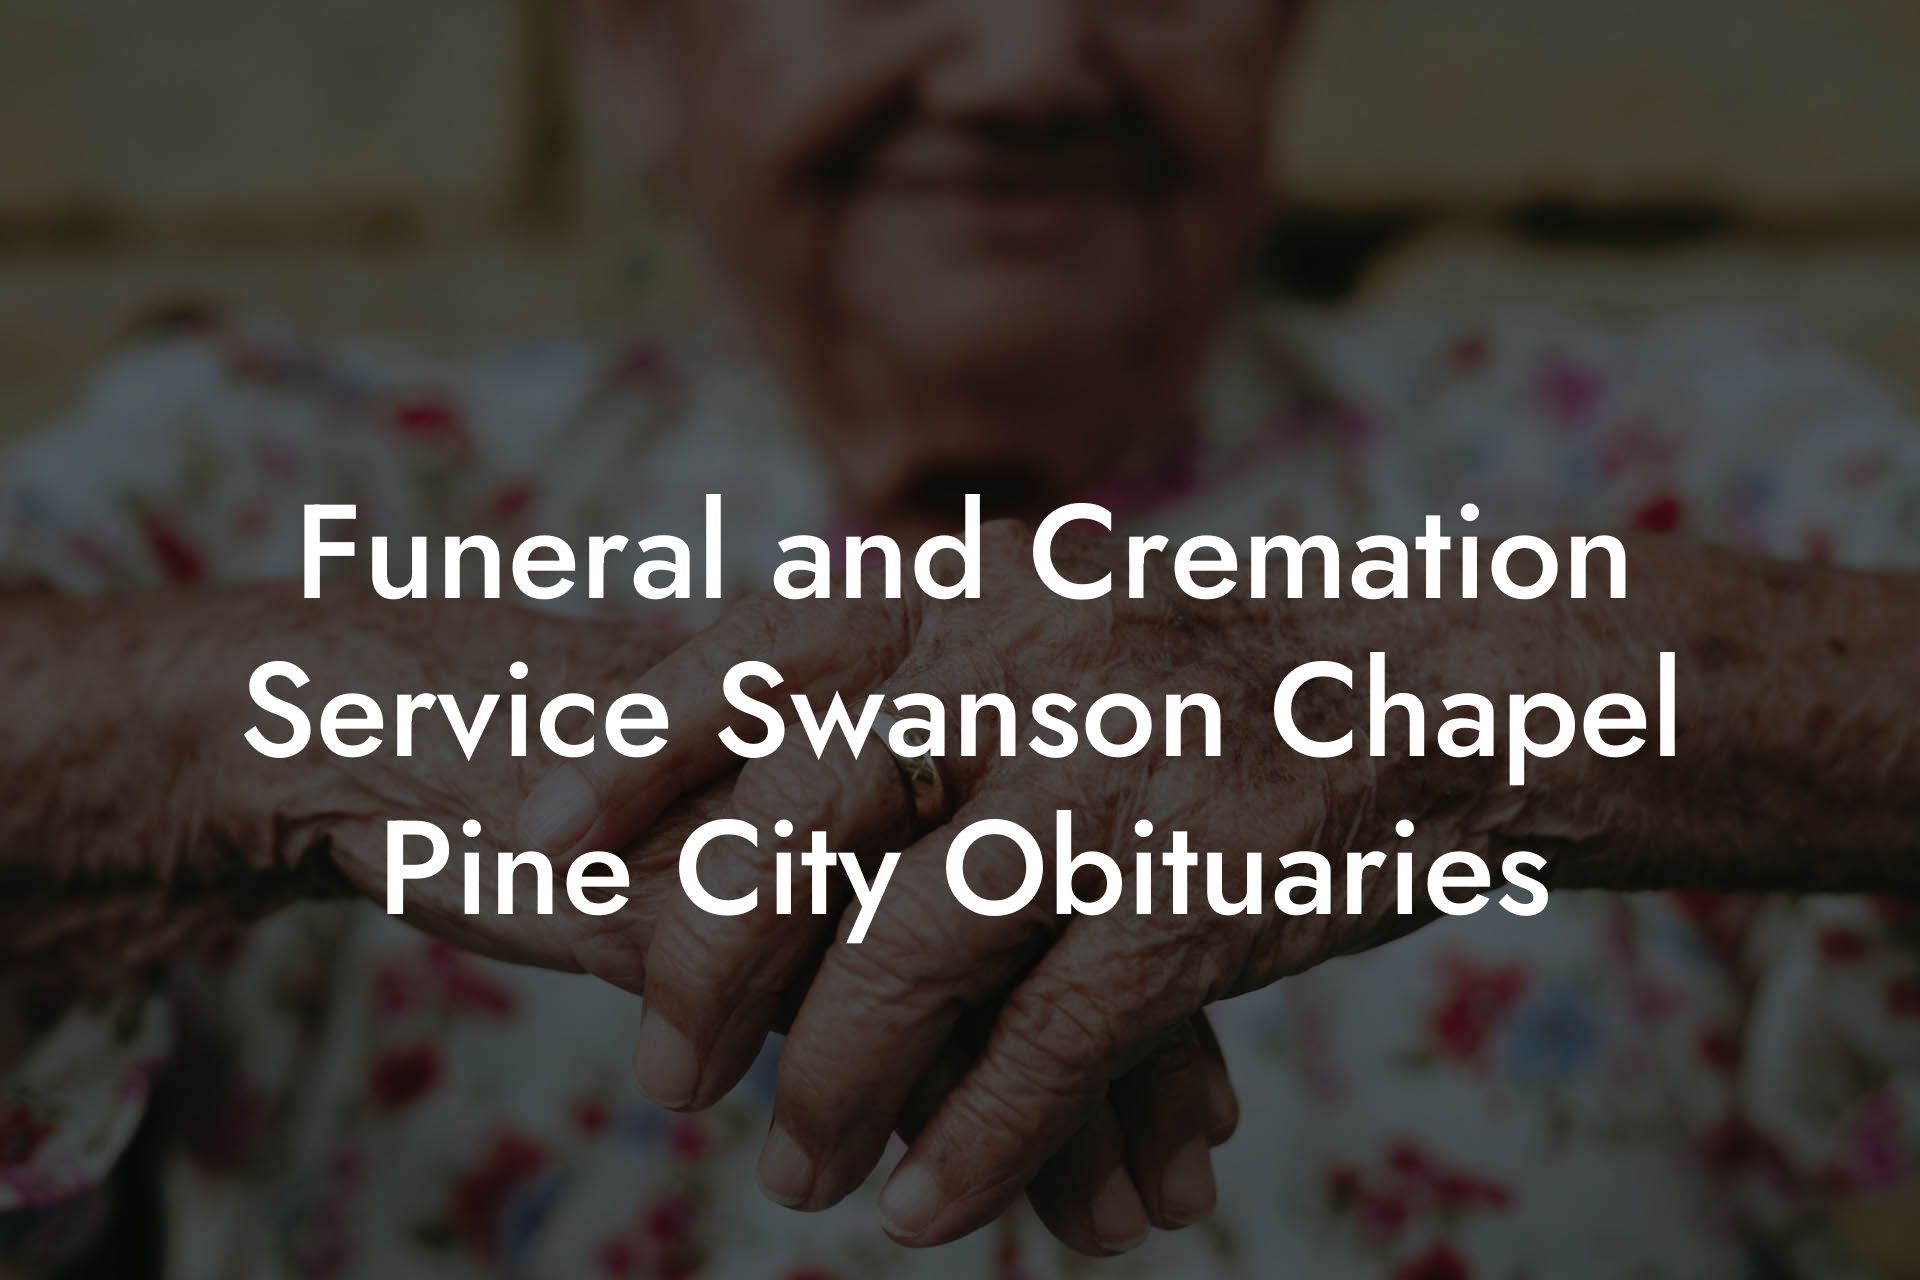 Funeral and Cremation Service Swanson Chapel Pine City Obituaries